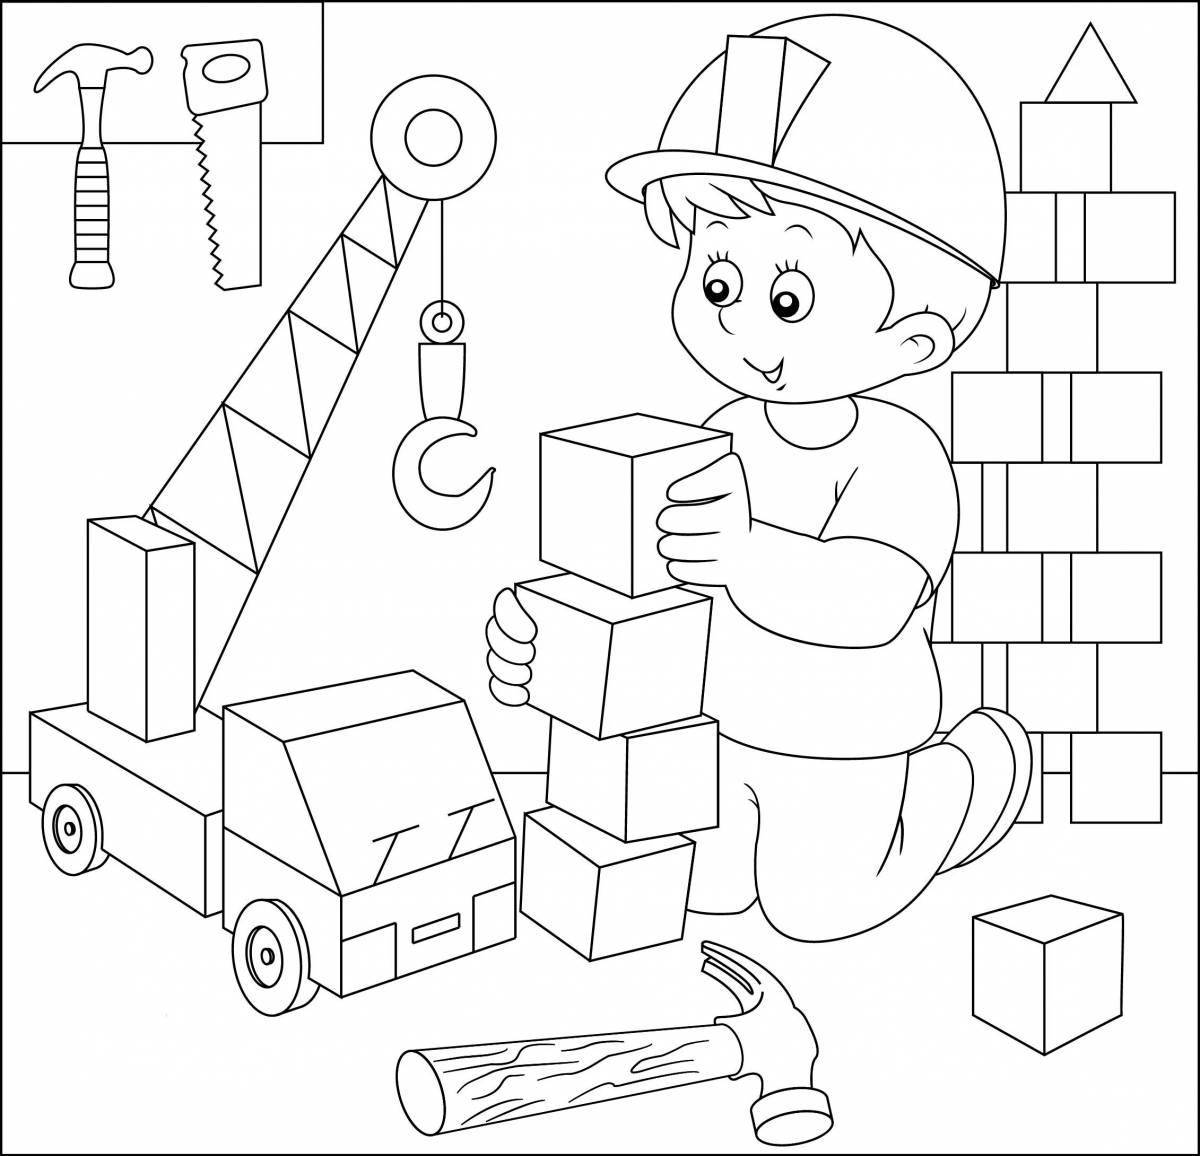 Occupational safety drawings through the eyes of children #4